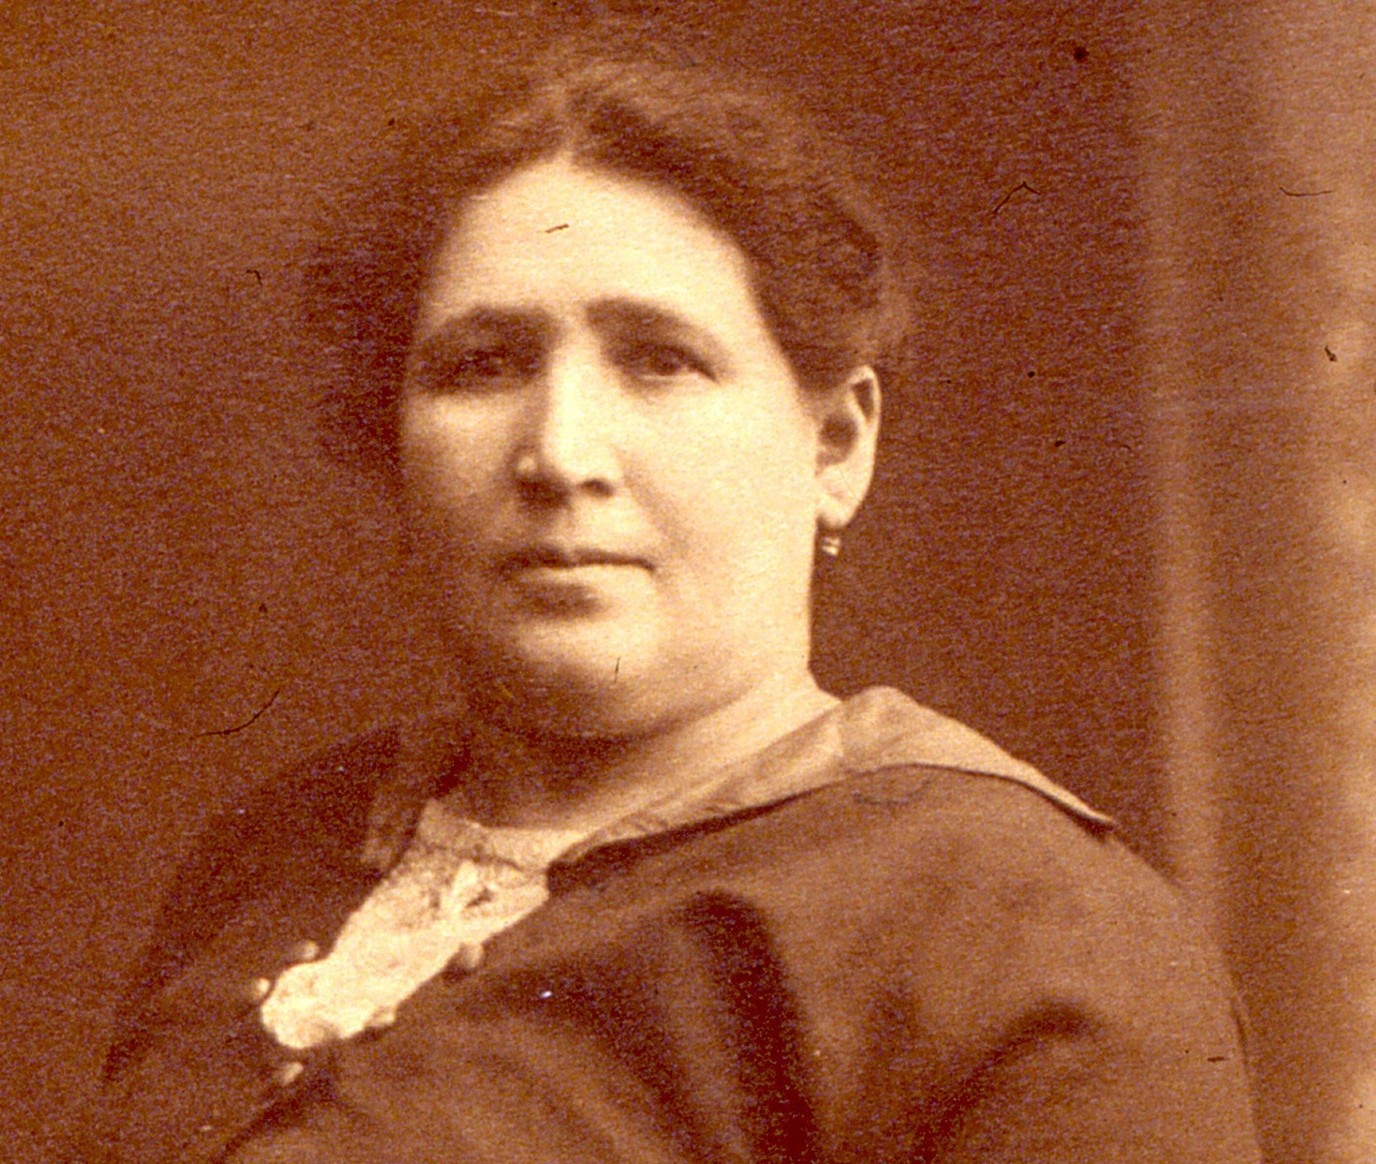 Sepia-toned headshot of Fannie Rogarshevsky with her hair pulled back and a neutral expression